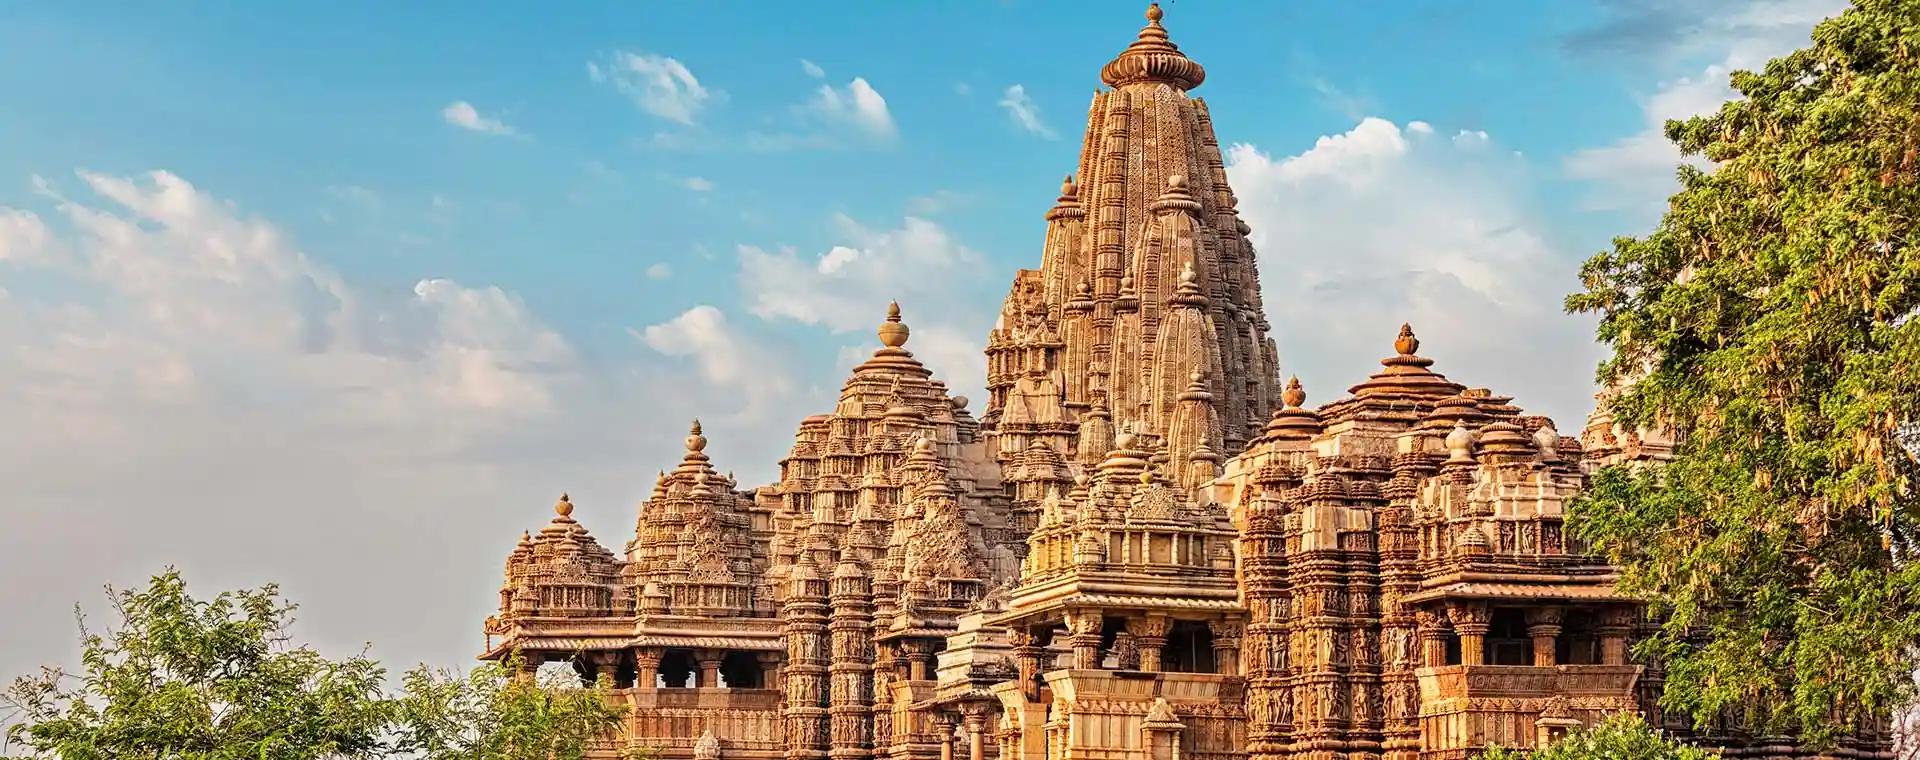 Top 15 Places to Visit in Khajuraho